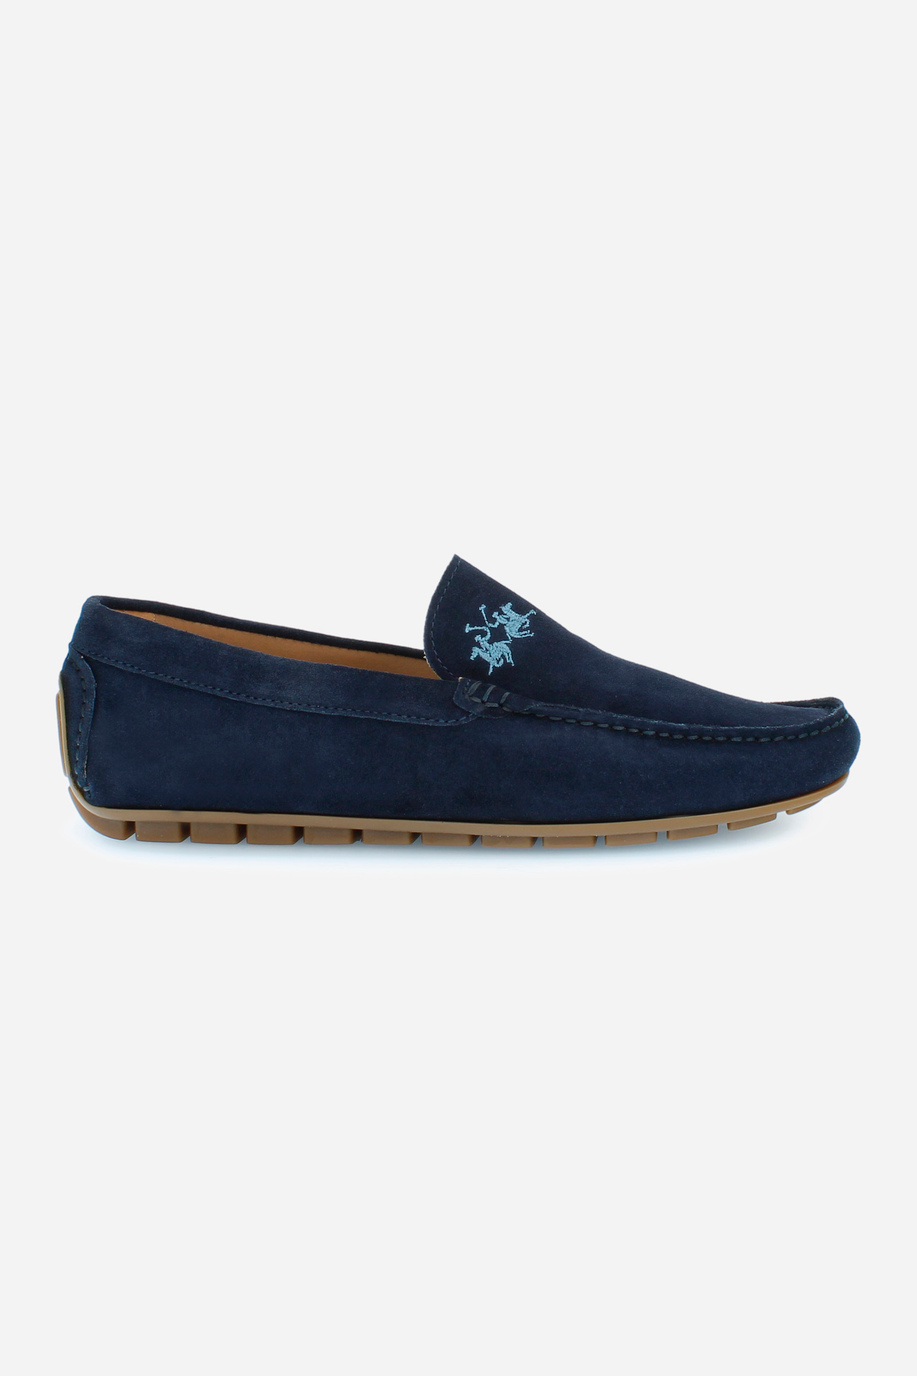 Men's suede loafers - Shoes and Accessories | La Martina - Official Online Shop